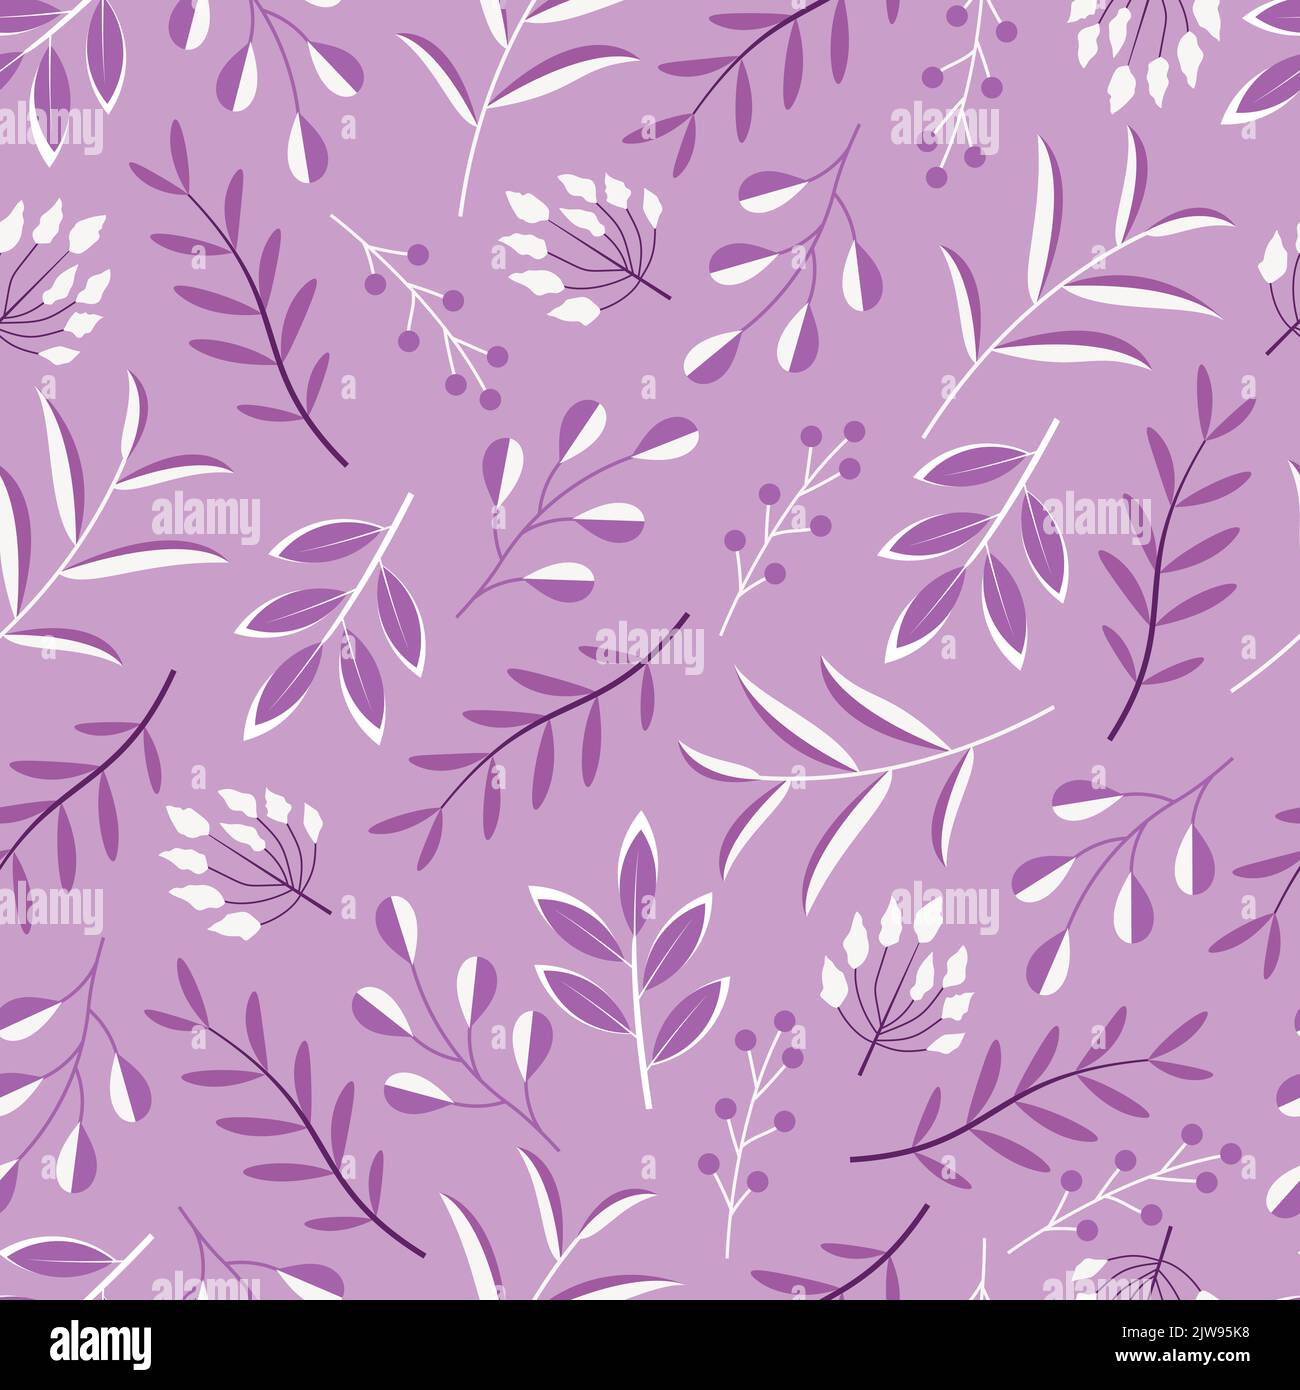 Ornate ditsy floral seamless pattern design. Abstract branches of leaves. Artistic foliage background for printing and textile Stock Vector